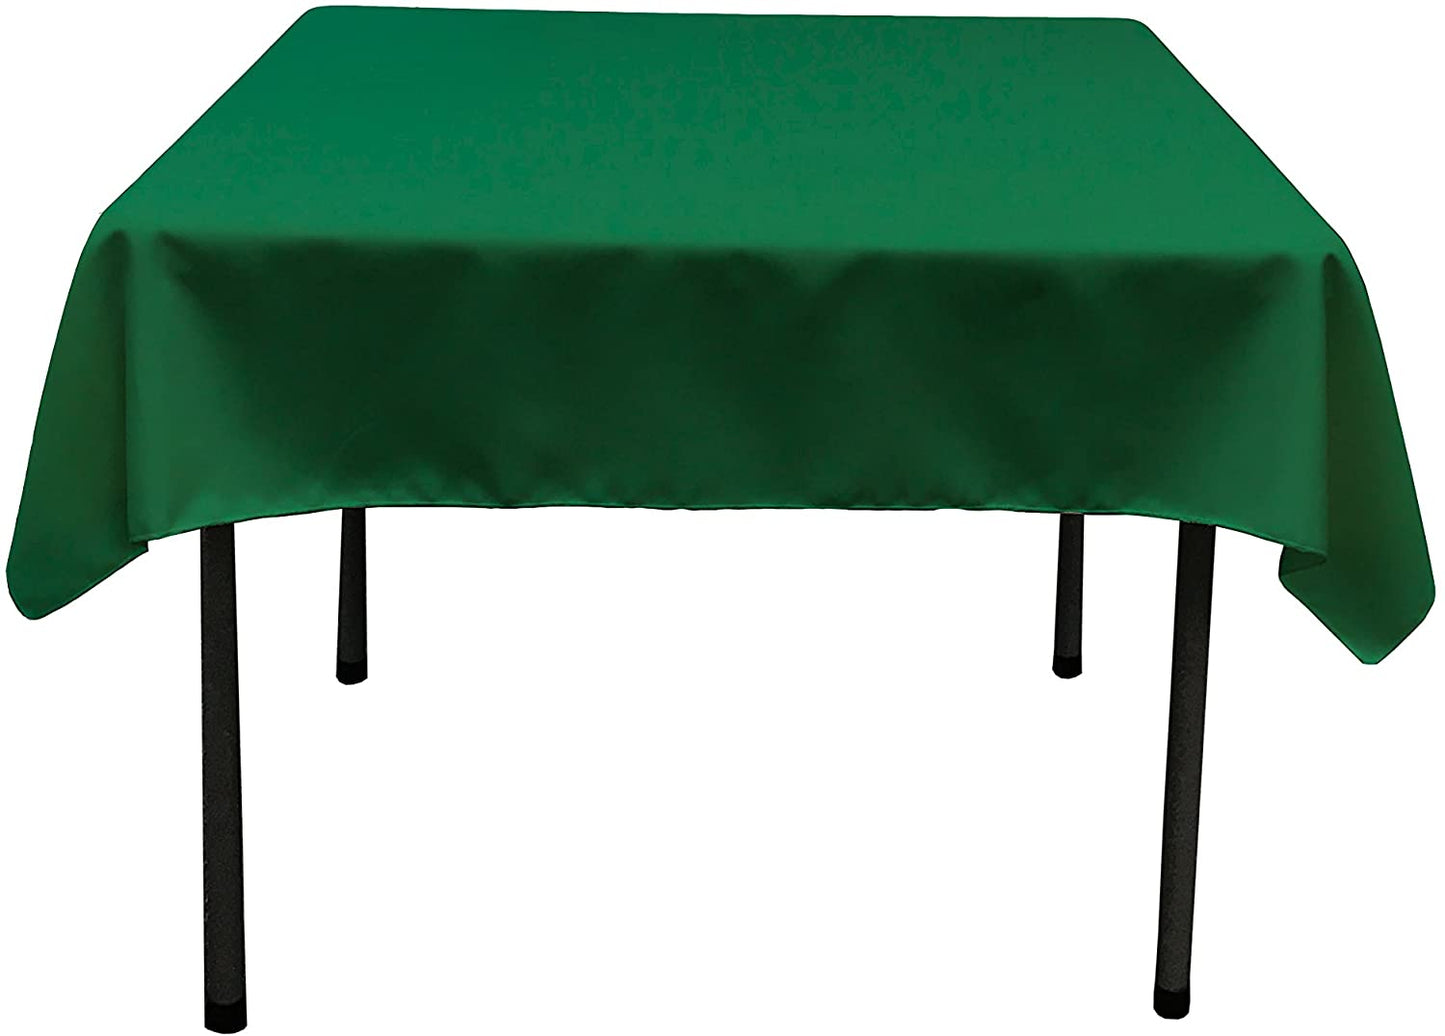 Polyester Poplin Washable Square Tablecloth, Stain and Wrinkle Resistant Table Cover Emerald Green